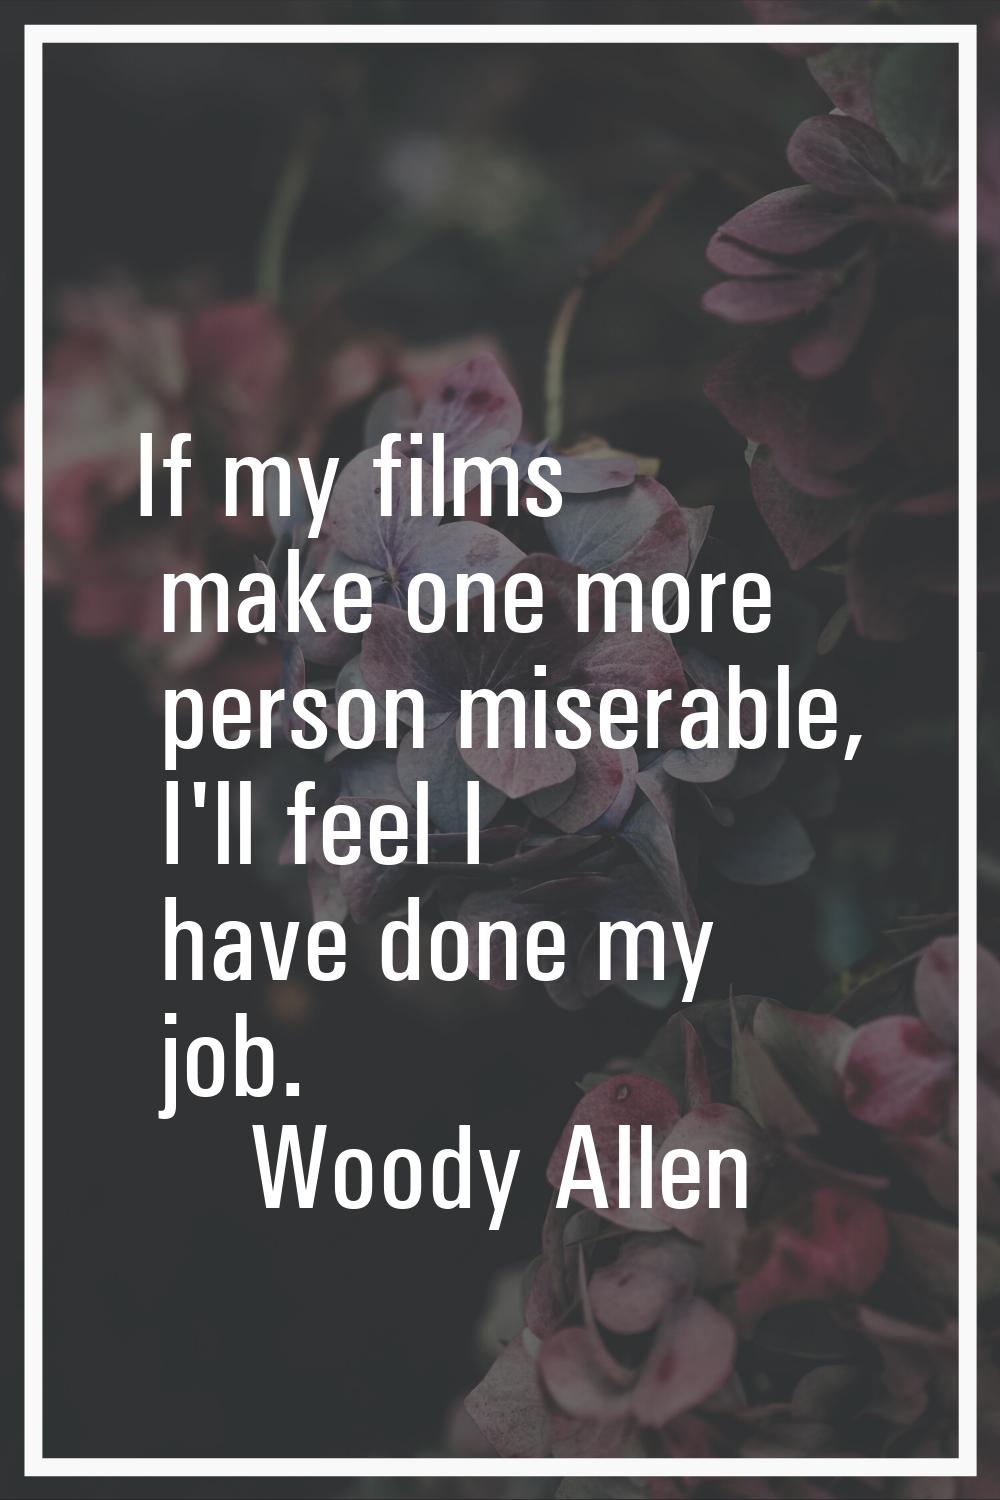 If my films make one more person miserable, I'll feel I have done my job.